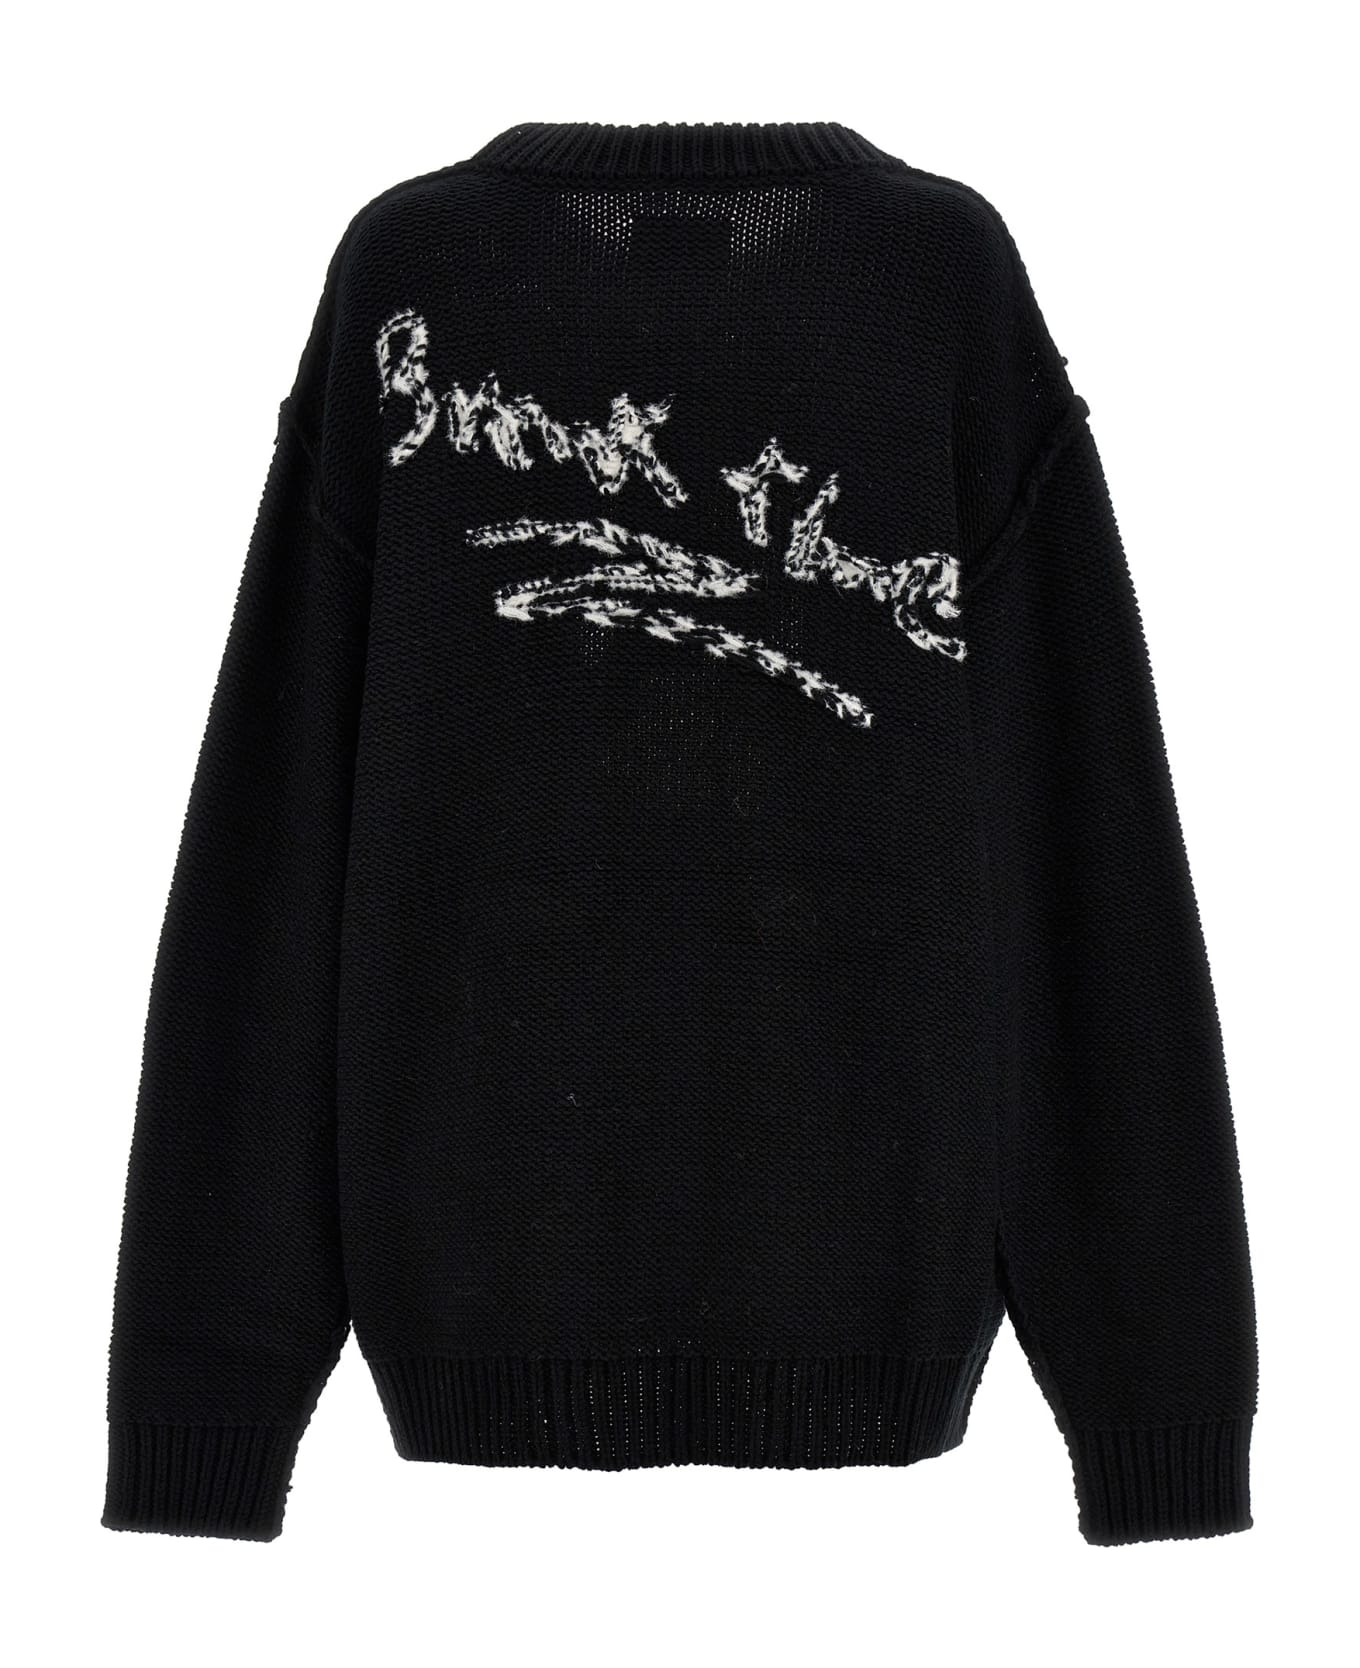 doublet Cut-out Sweater - Black